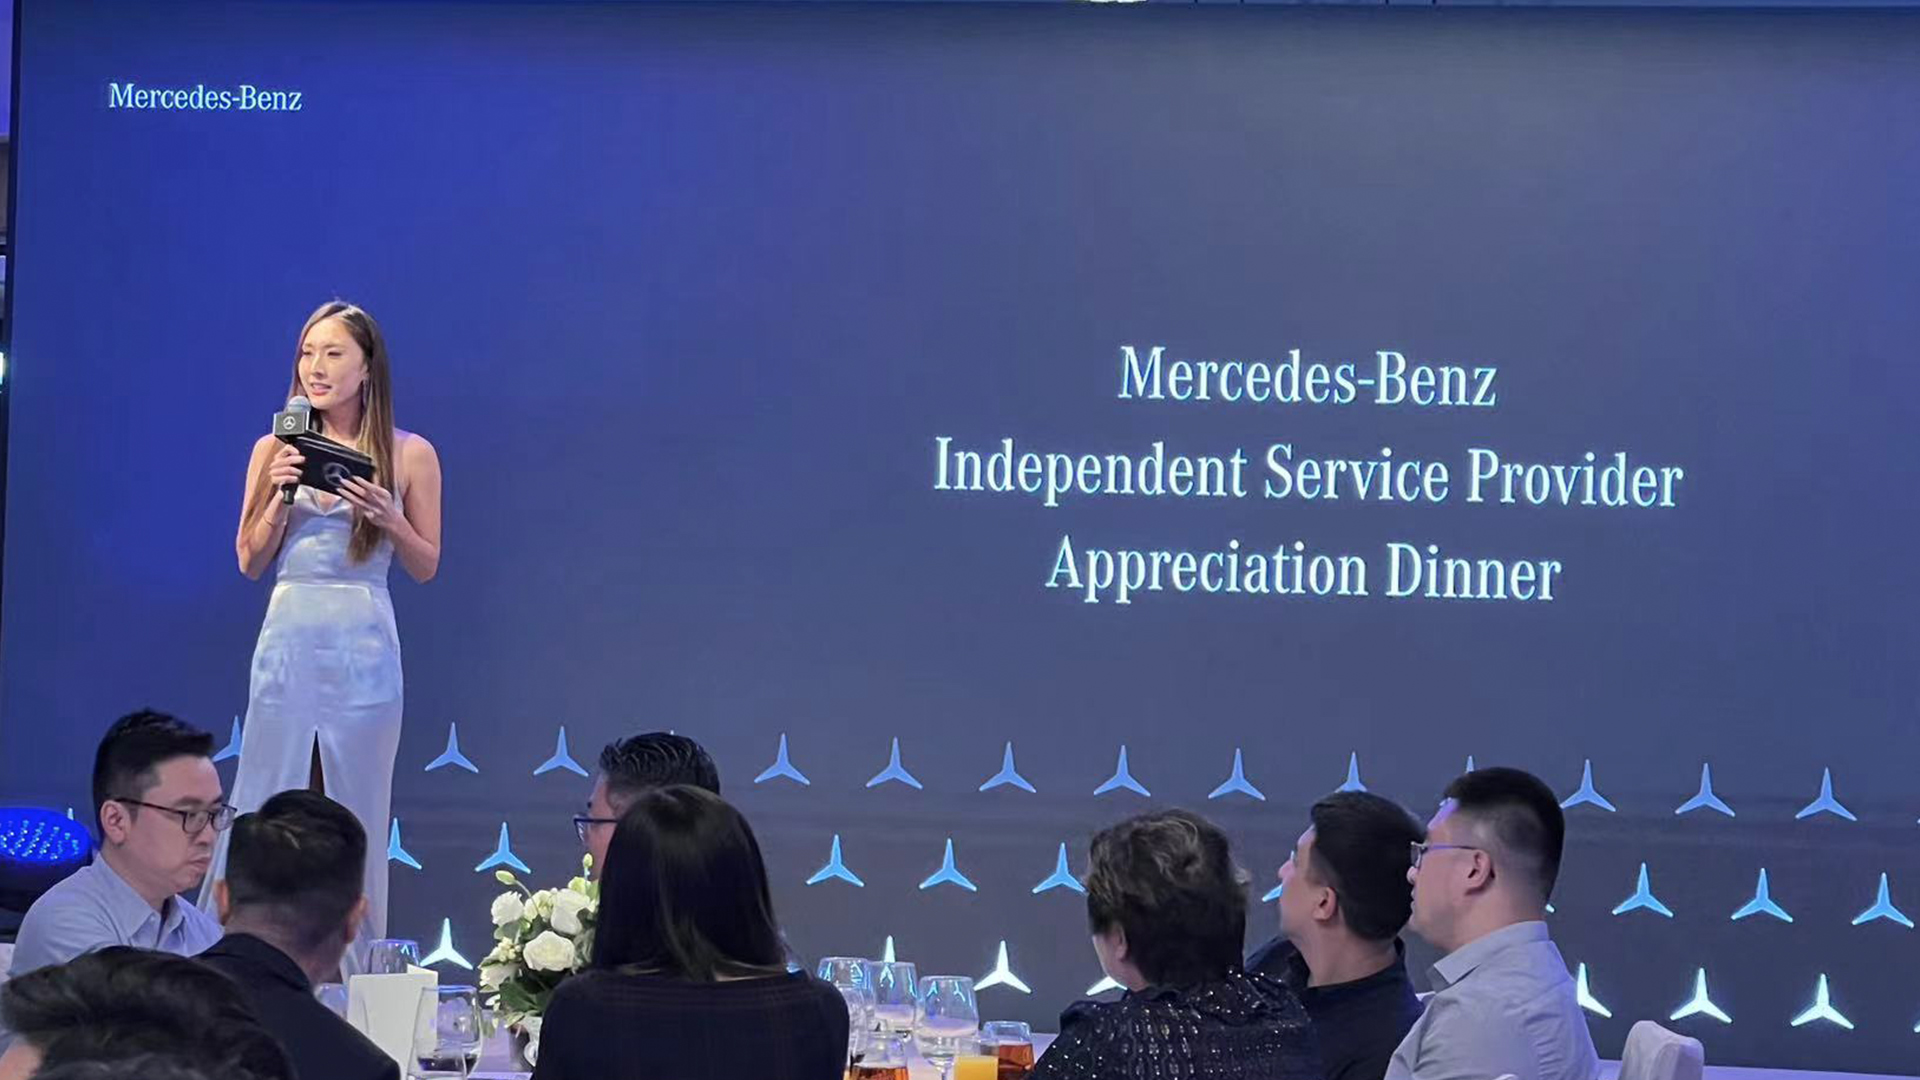 D2 Studio Annual Dinner Banquet event with mercedes benz_5